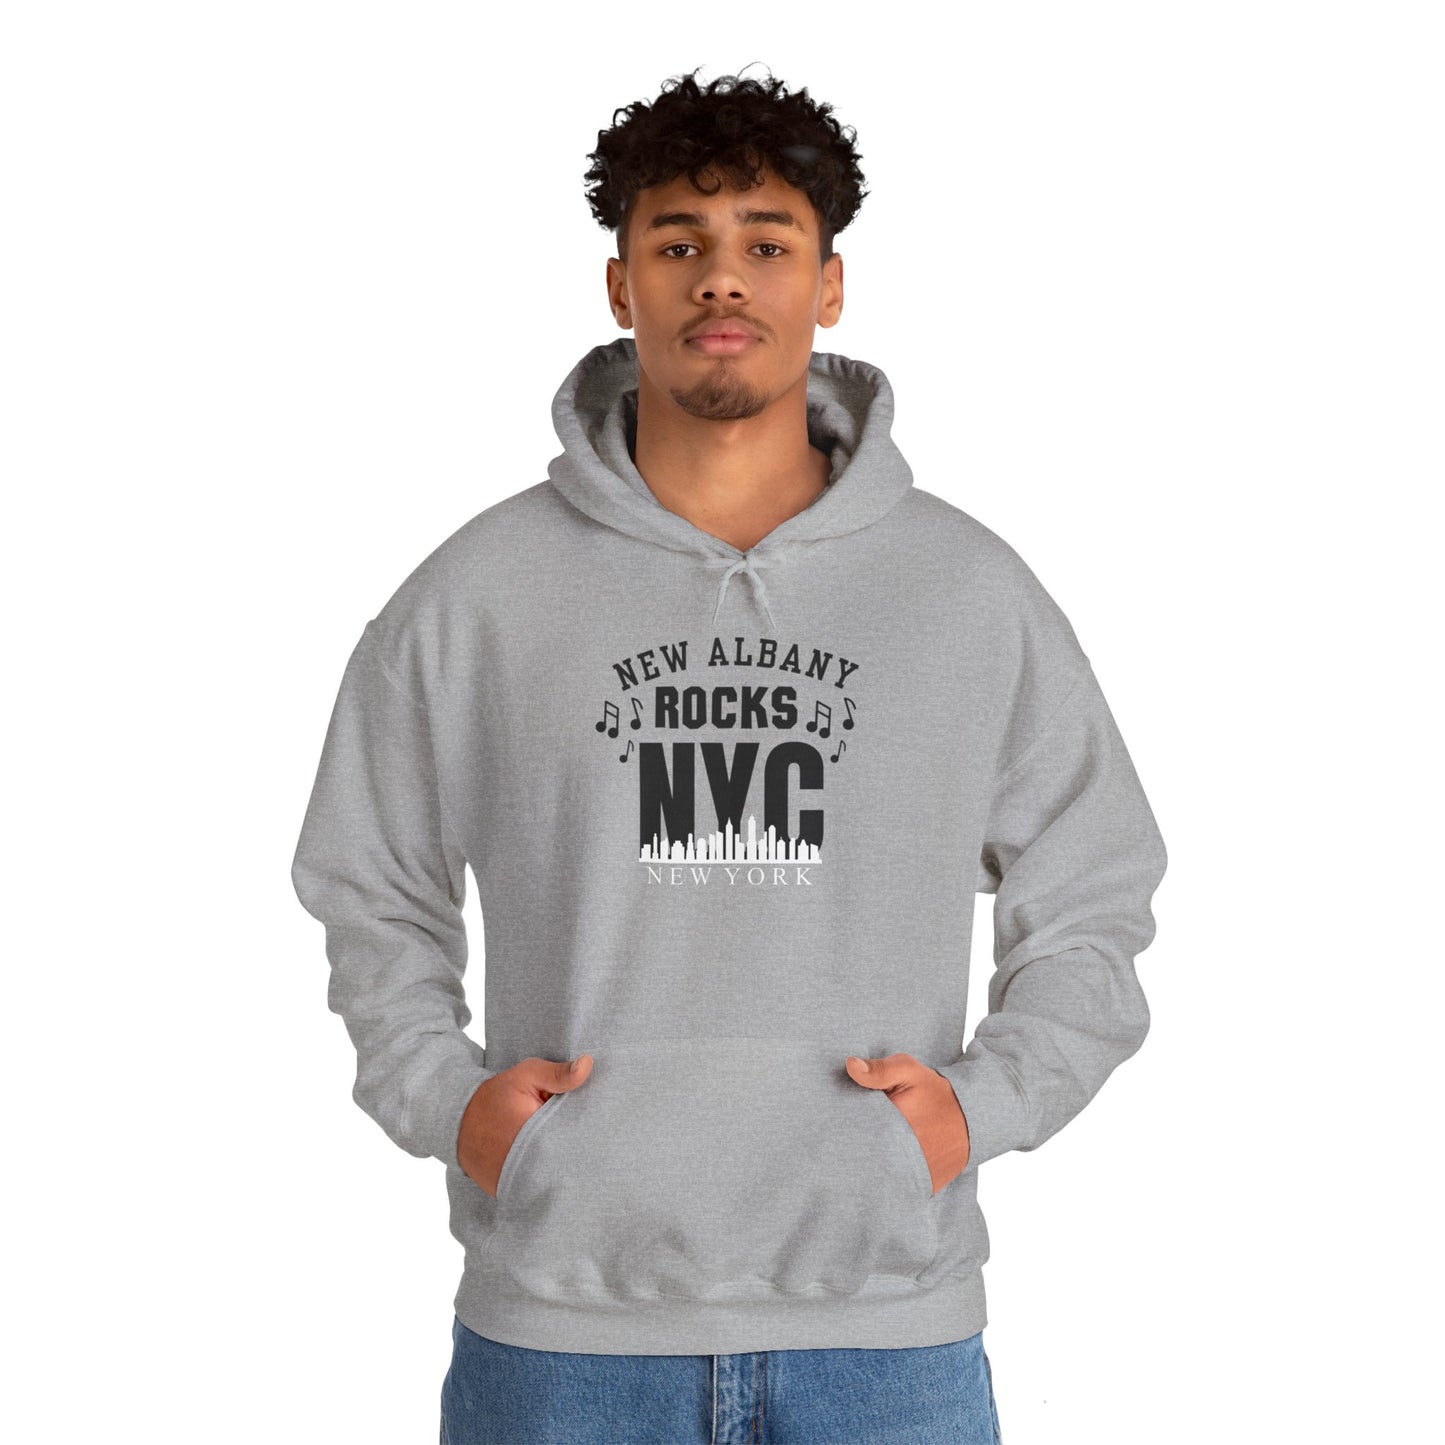 Adult Unisex Rock NYC Graphic Hoodie- New Albany Eagles